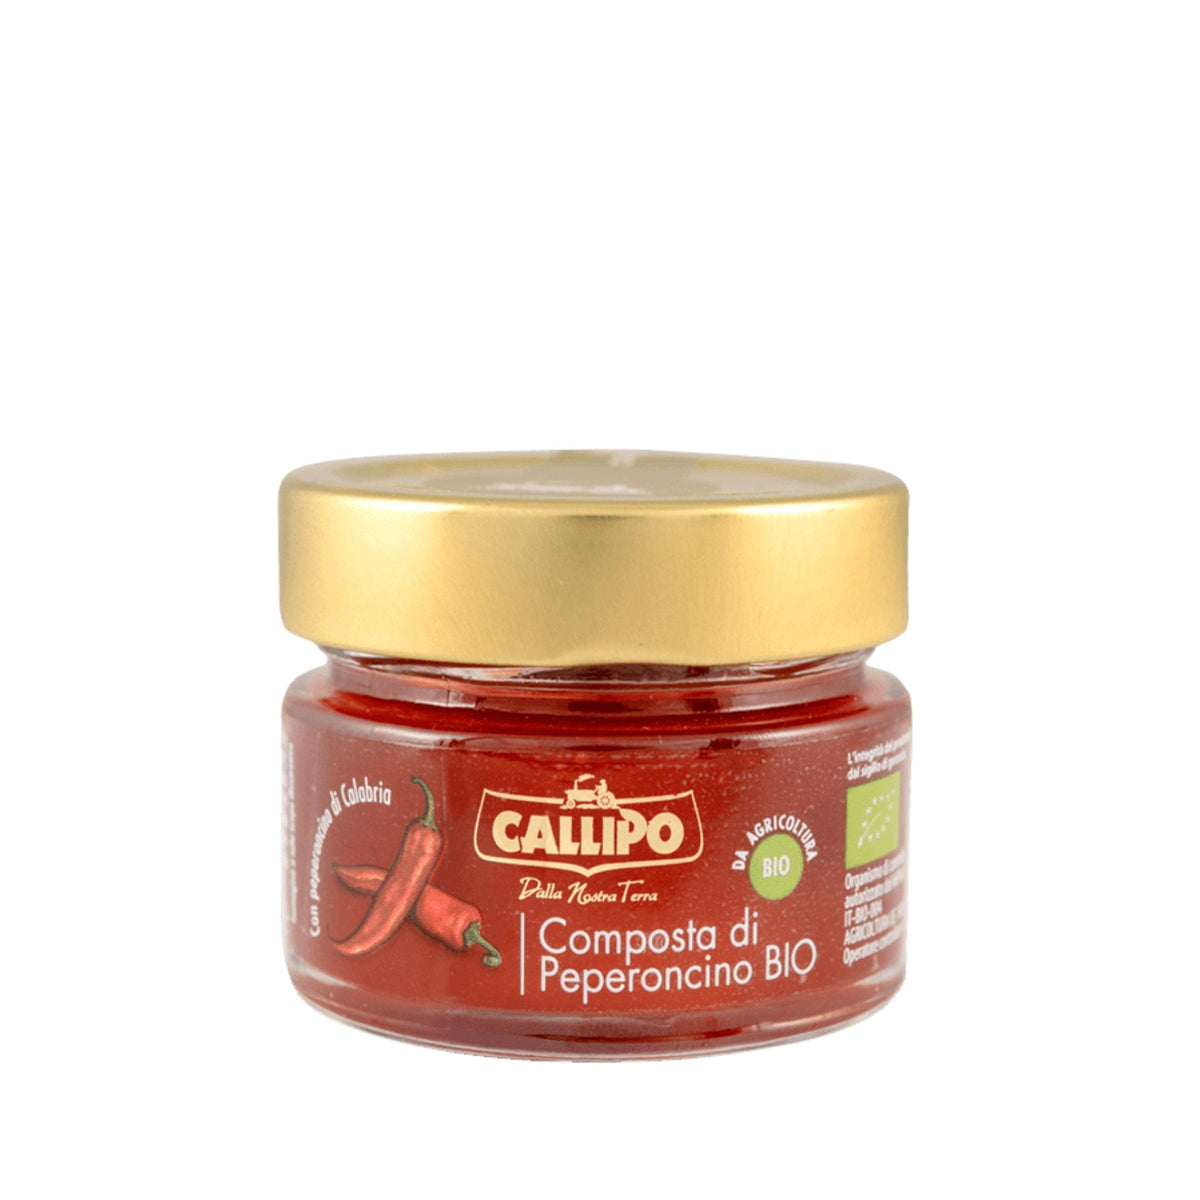 Callipo Organic Chilli Spread 130g  | Imported and distributed in the UK by Just Gourmet Foods